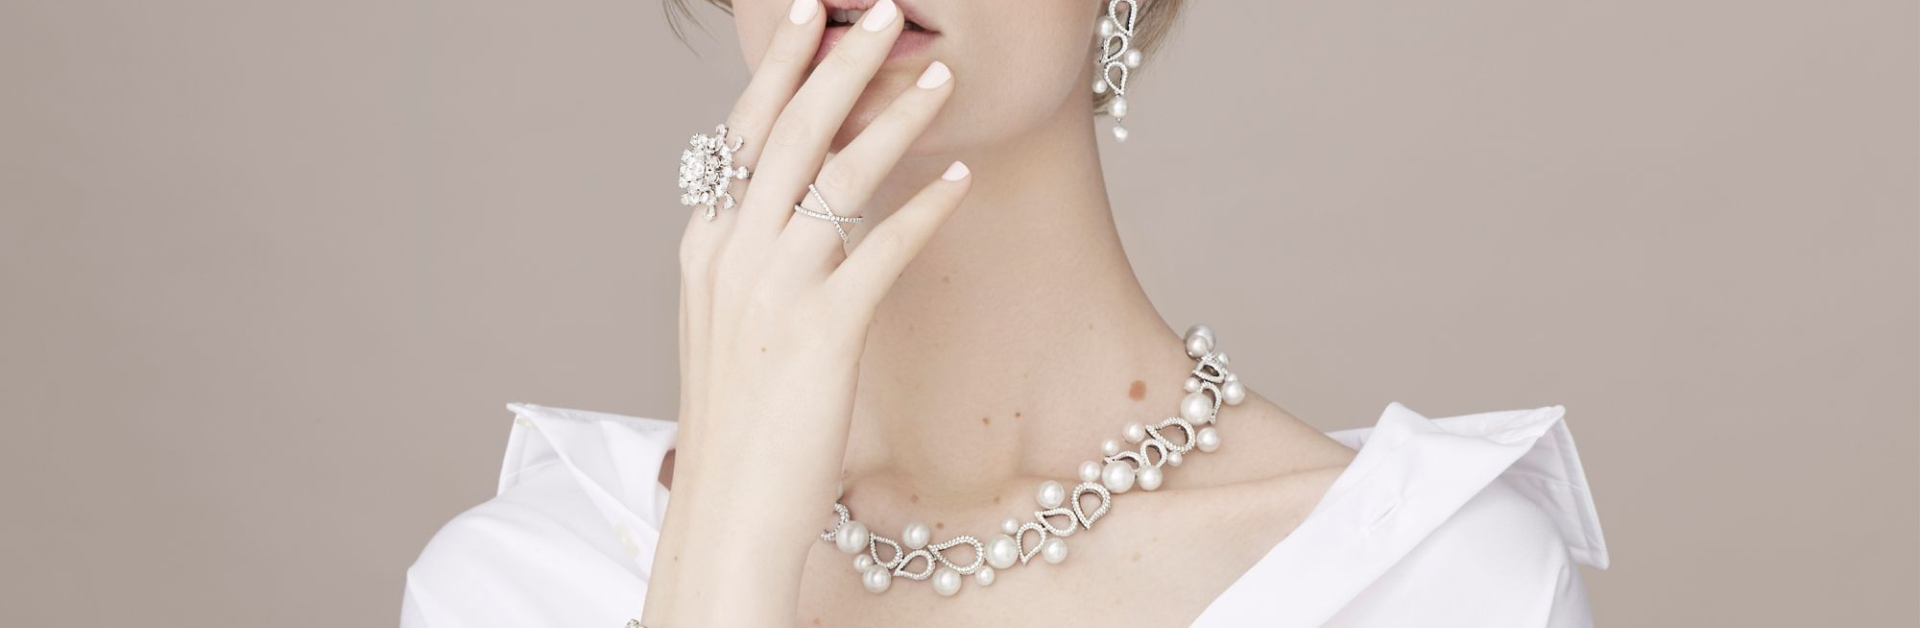 What is jewelry? Why is jewelry important in fashion?